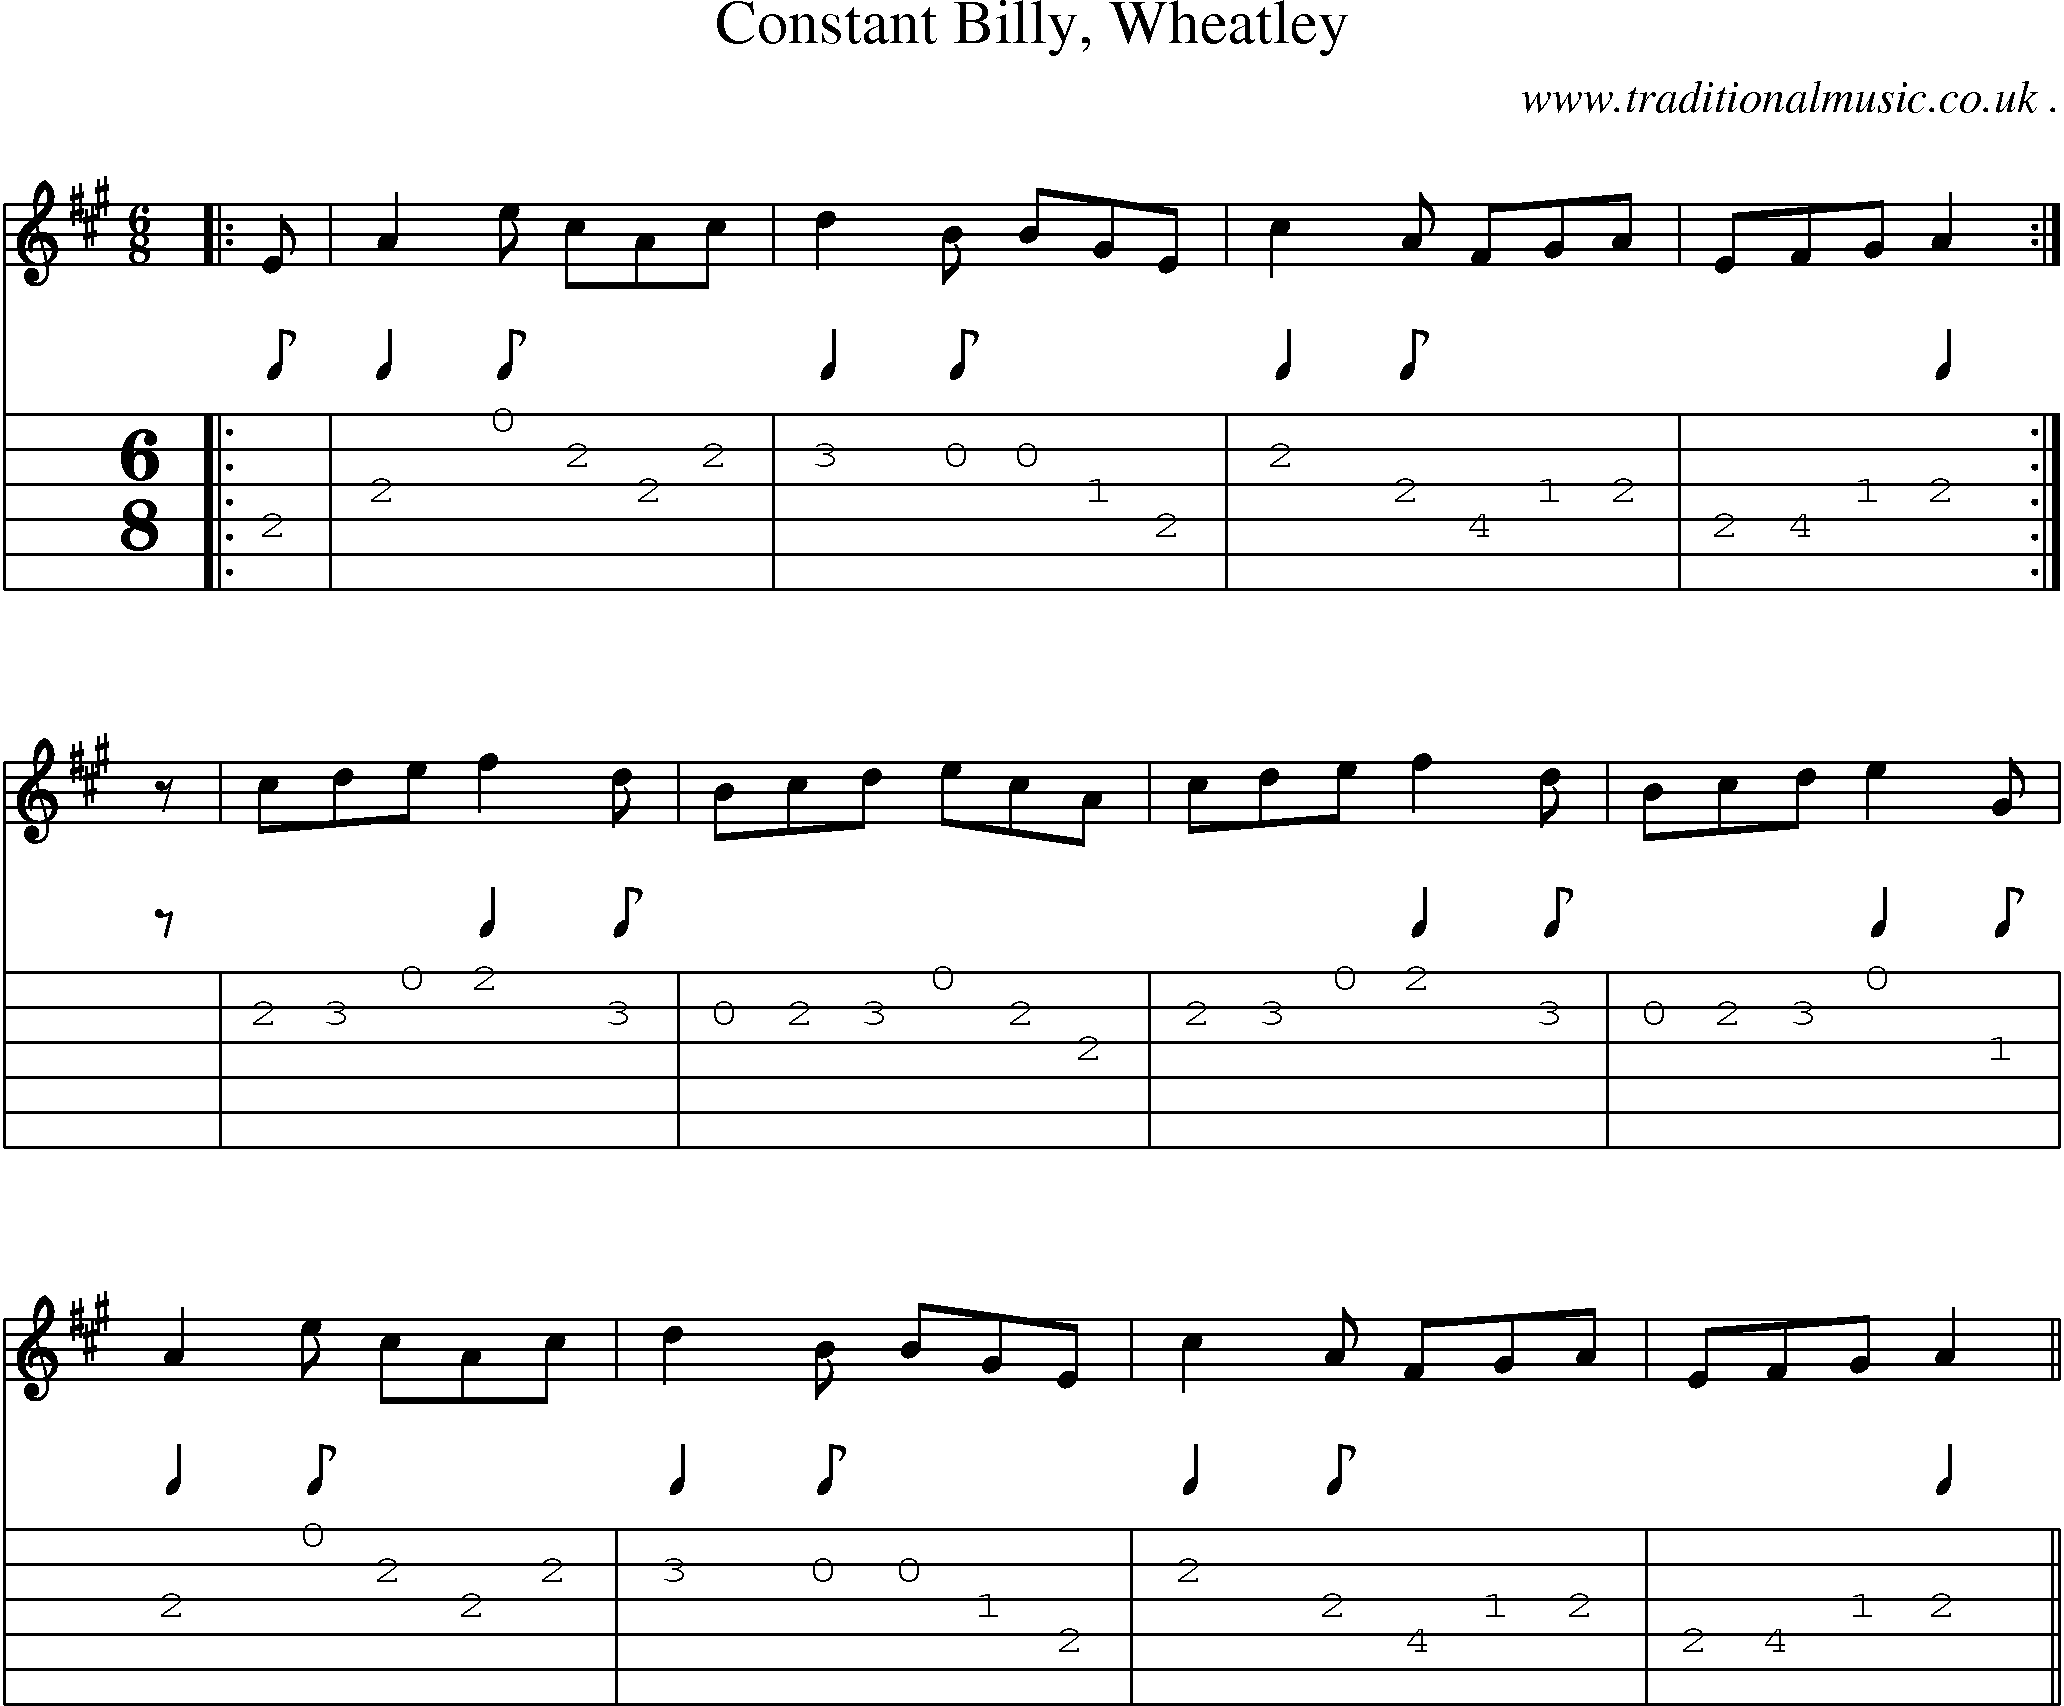 Sheet-Music and Guitar Tabs for Constant Billy Wheatley